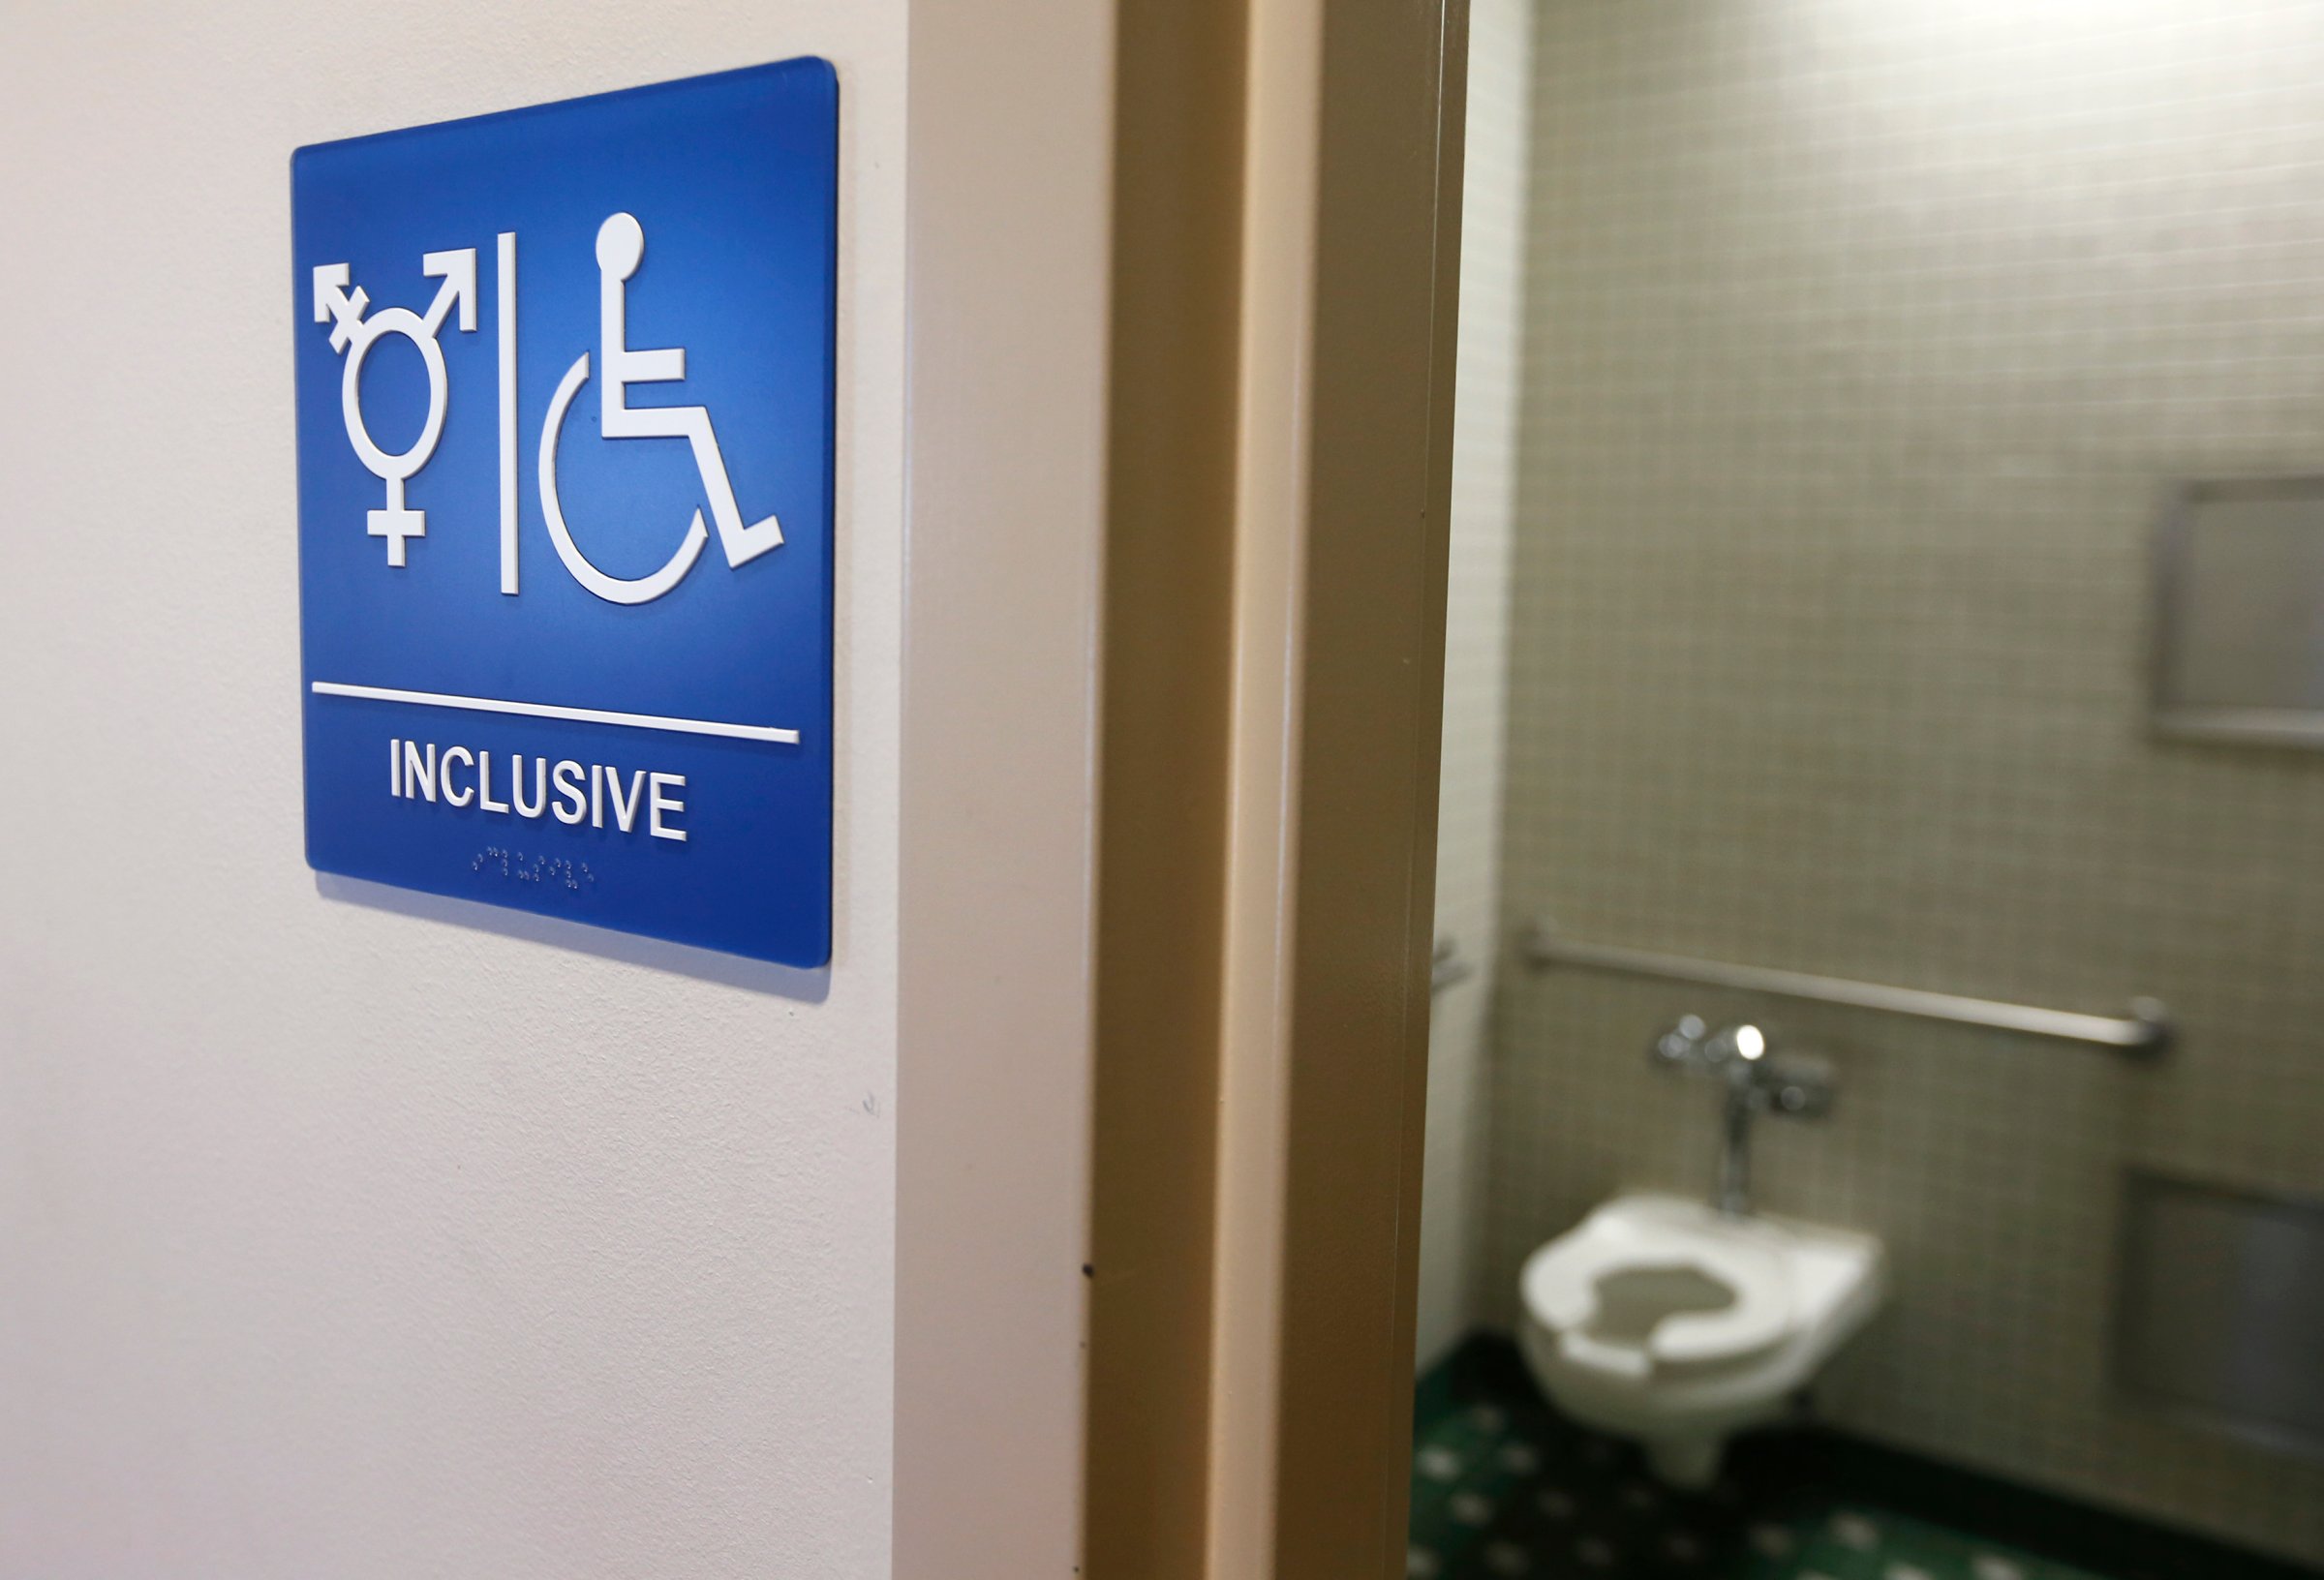 A gender-neutral bathroom is seen at the University of California, Irvine in Irvine, Calif., Sept. 30, 2014.